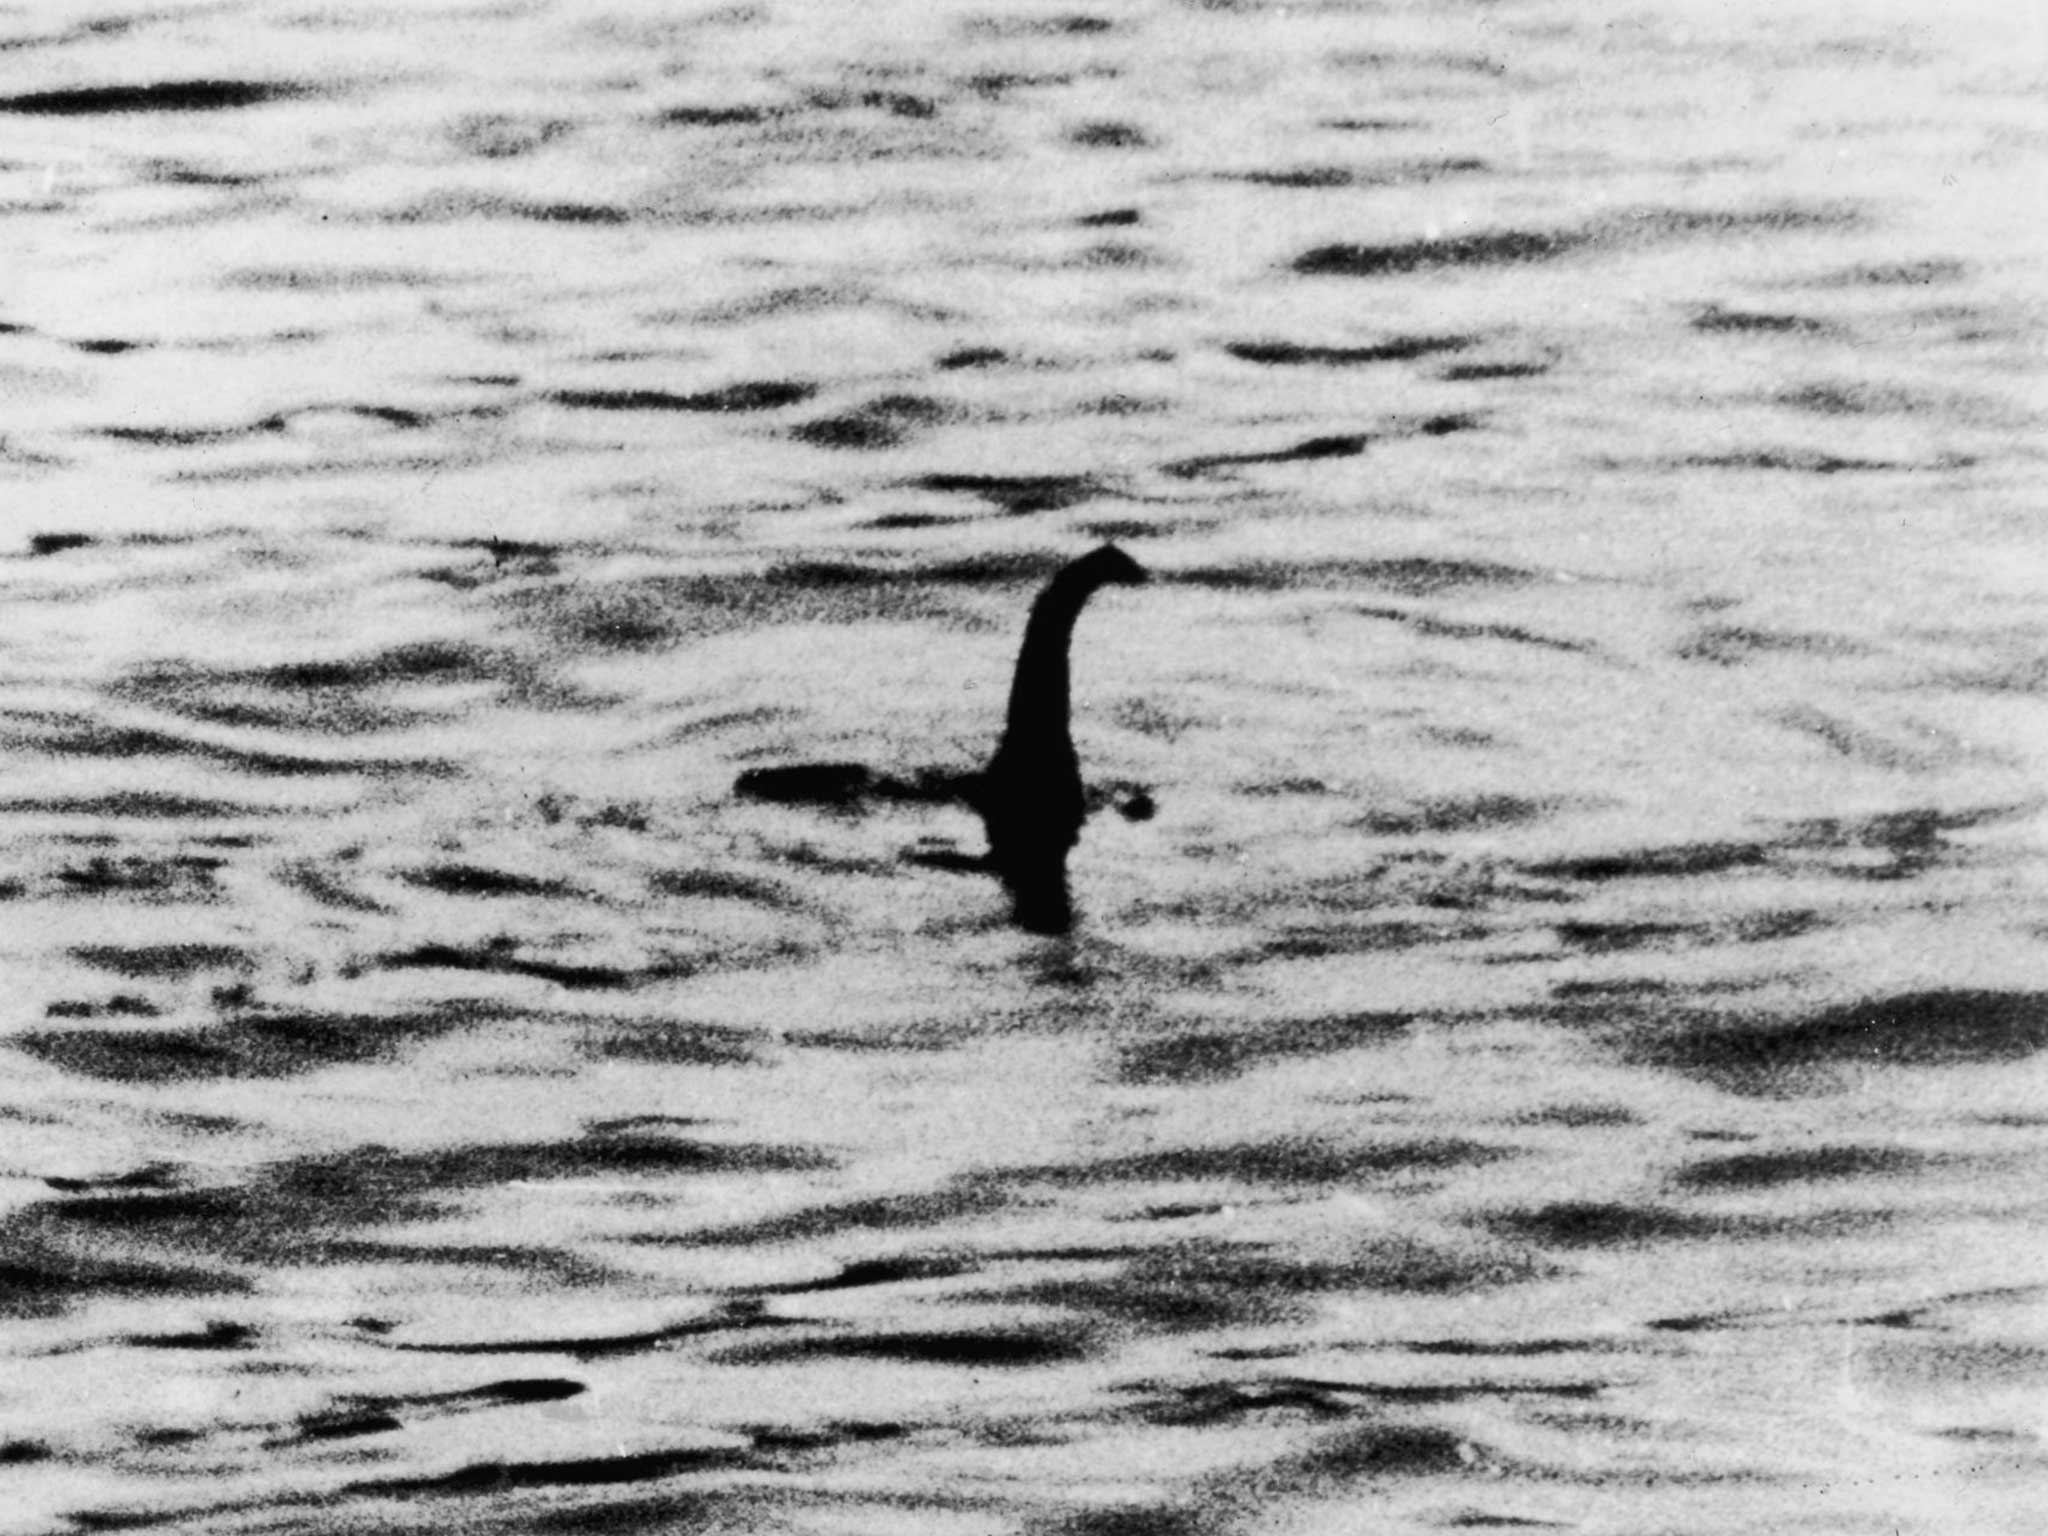 A ‘view’ of the Loch Ness Monster at Inverness in April 1934. The photograph was later exposed as a hoax